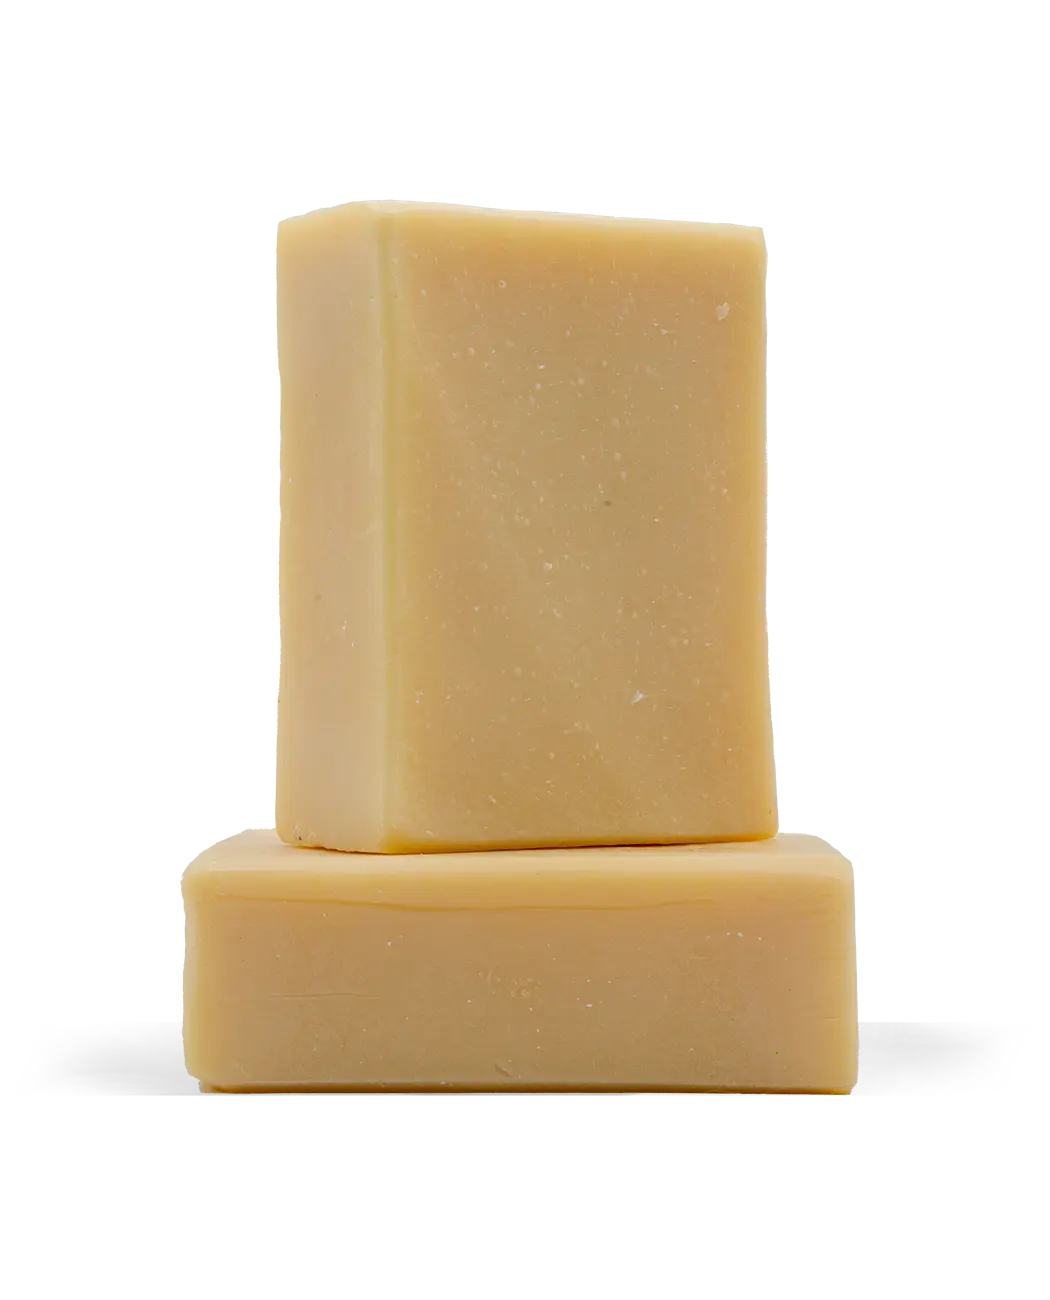 Dr. Squatch - Natural Soap Sundays 💪 Today we're spotlighting the Coconut  Milk that is utilized by our Coconut Castaway Bar 🥥 Not only does this  unique component enhance the tropical aroma